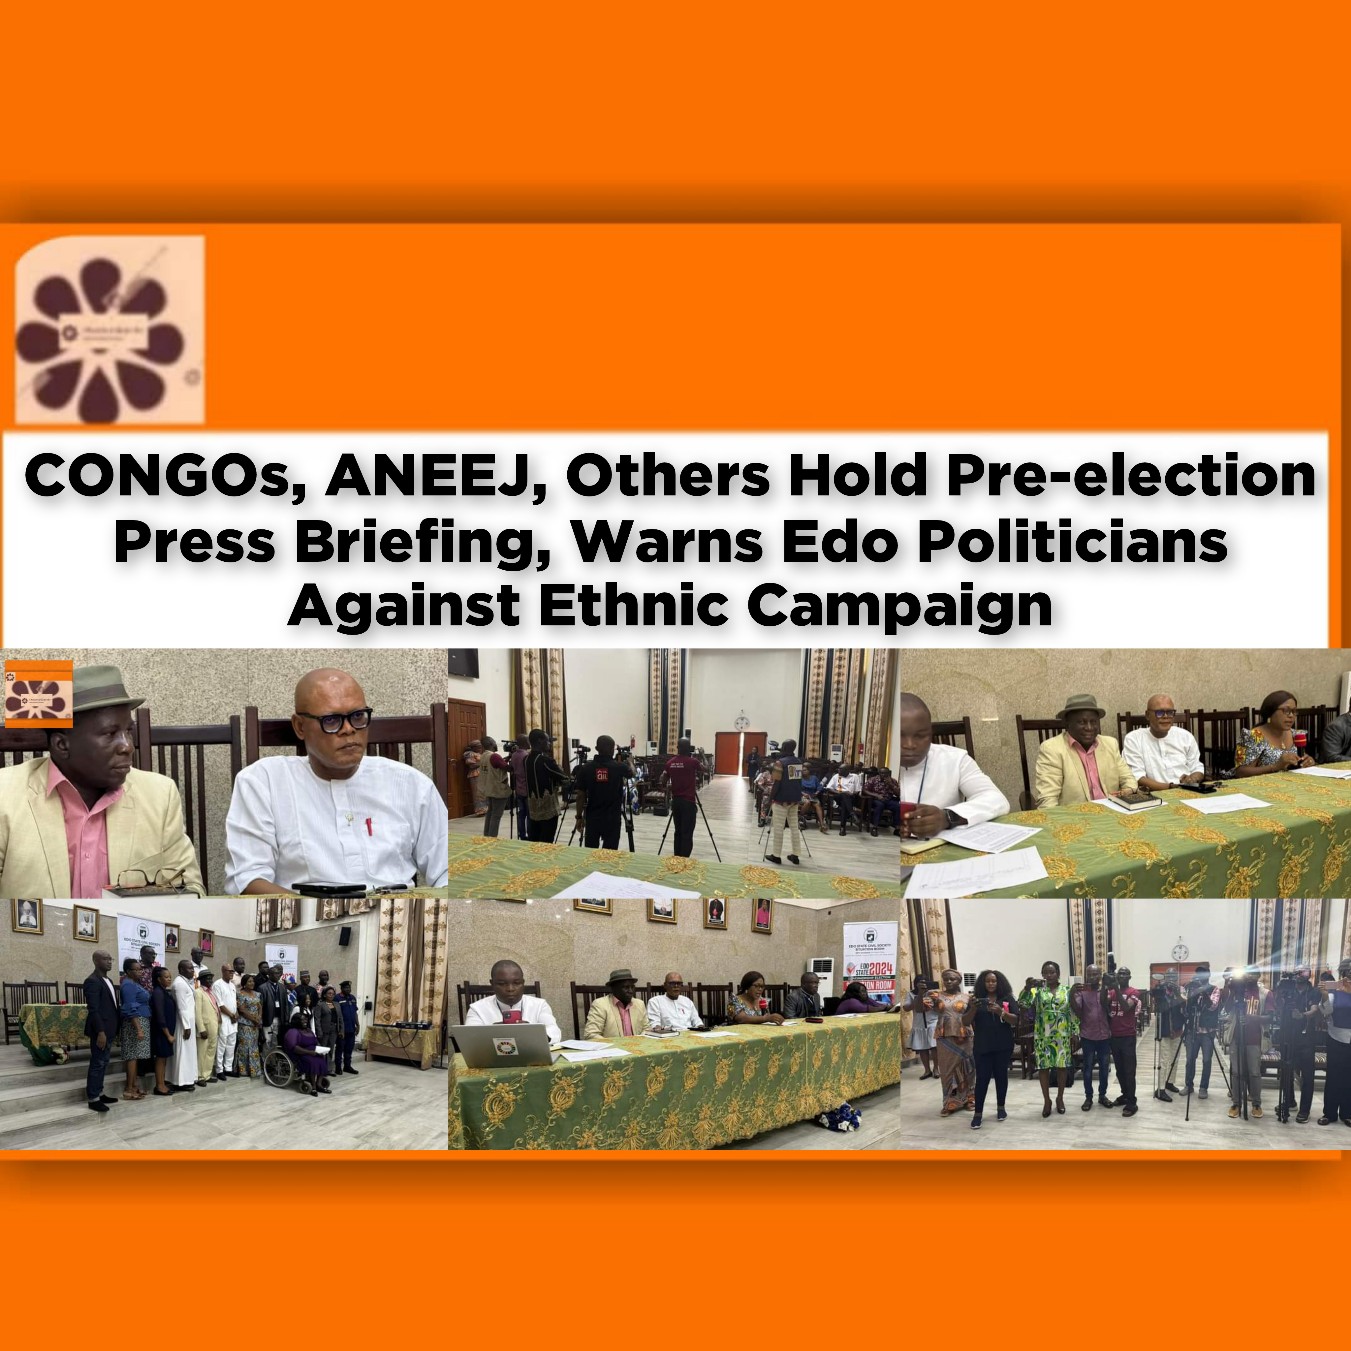 CONGOs, ANEEJ, Others Hold Pre-election Press Briefing, Warns Edo Politicians Against Ethnic Campaign ~ OsazuwaAkonedo #Redesign